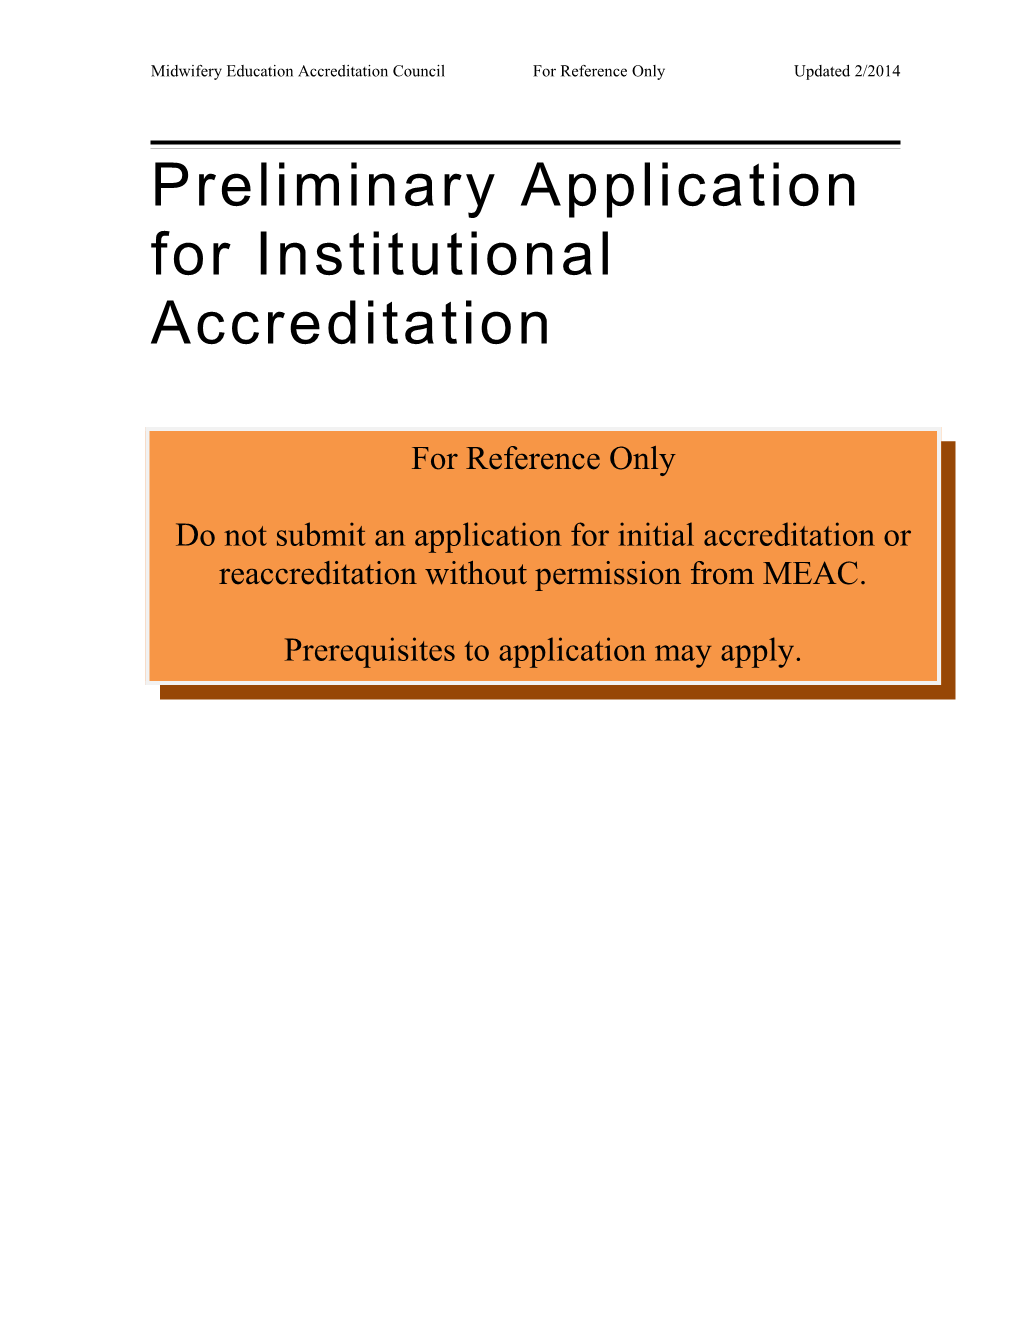 Part I Preliminary Application for Institutional Accreditation